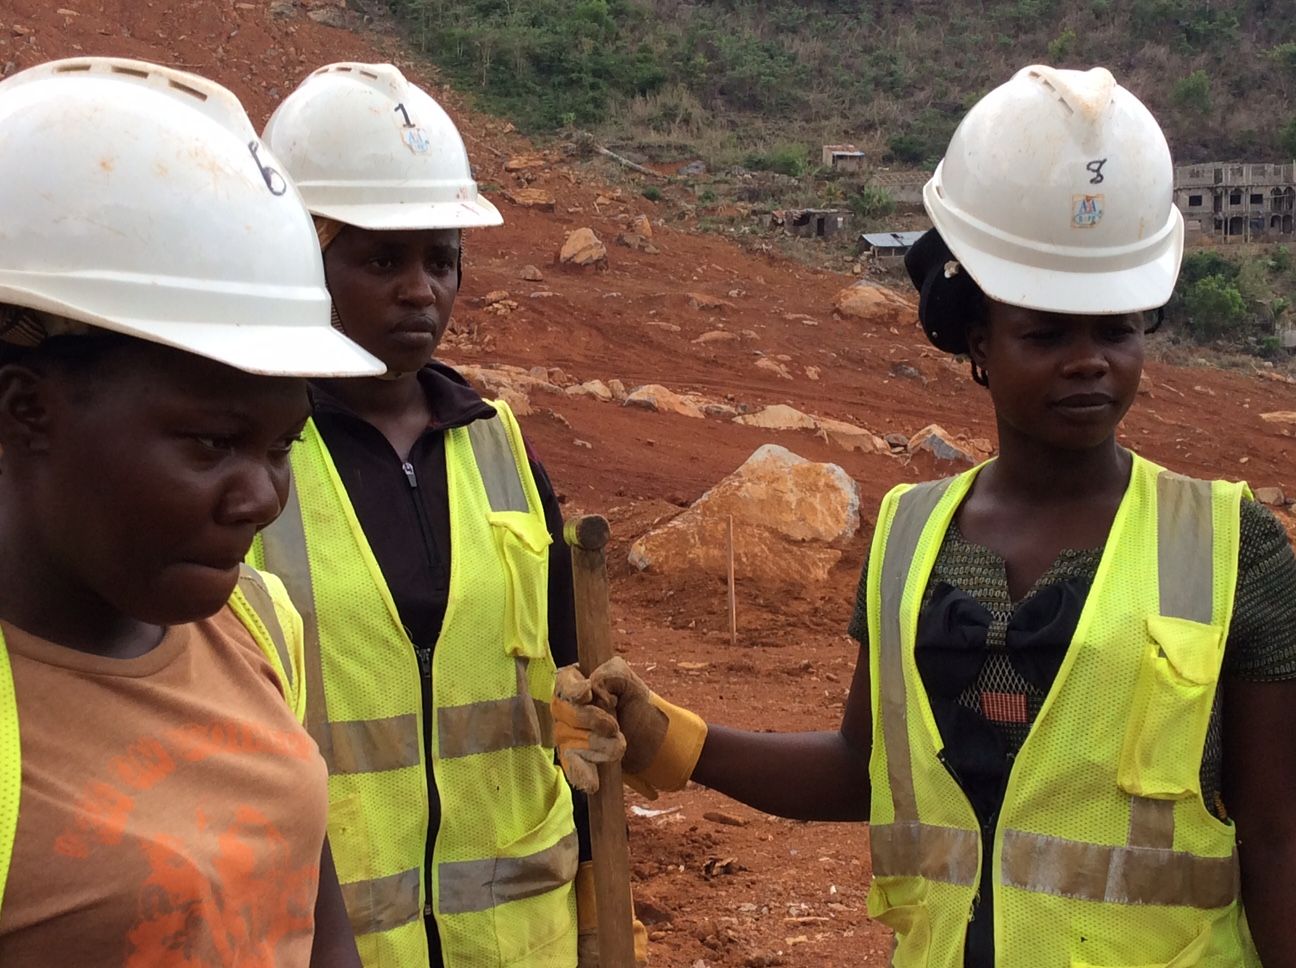 (From L to R) Jinnah Vormboi, Musu Jabbie, at Fatmata Sheriff listen to instructions from Trudy Morgan (not shown) at the Regent work site on Sugar Loaf Mountain. Image by Kadia Goba. Sierra Leone, 2018.